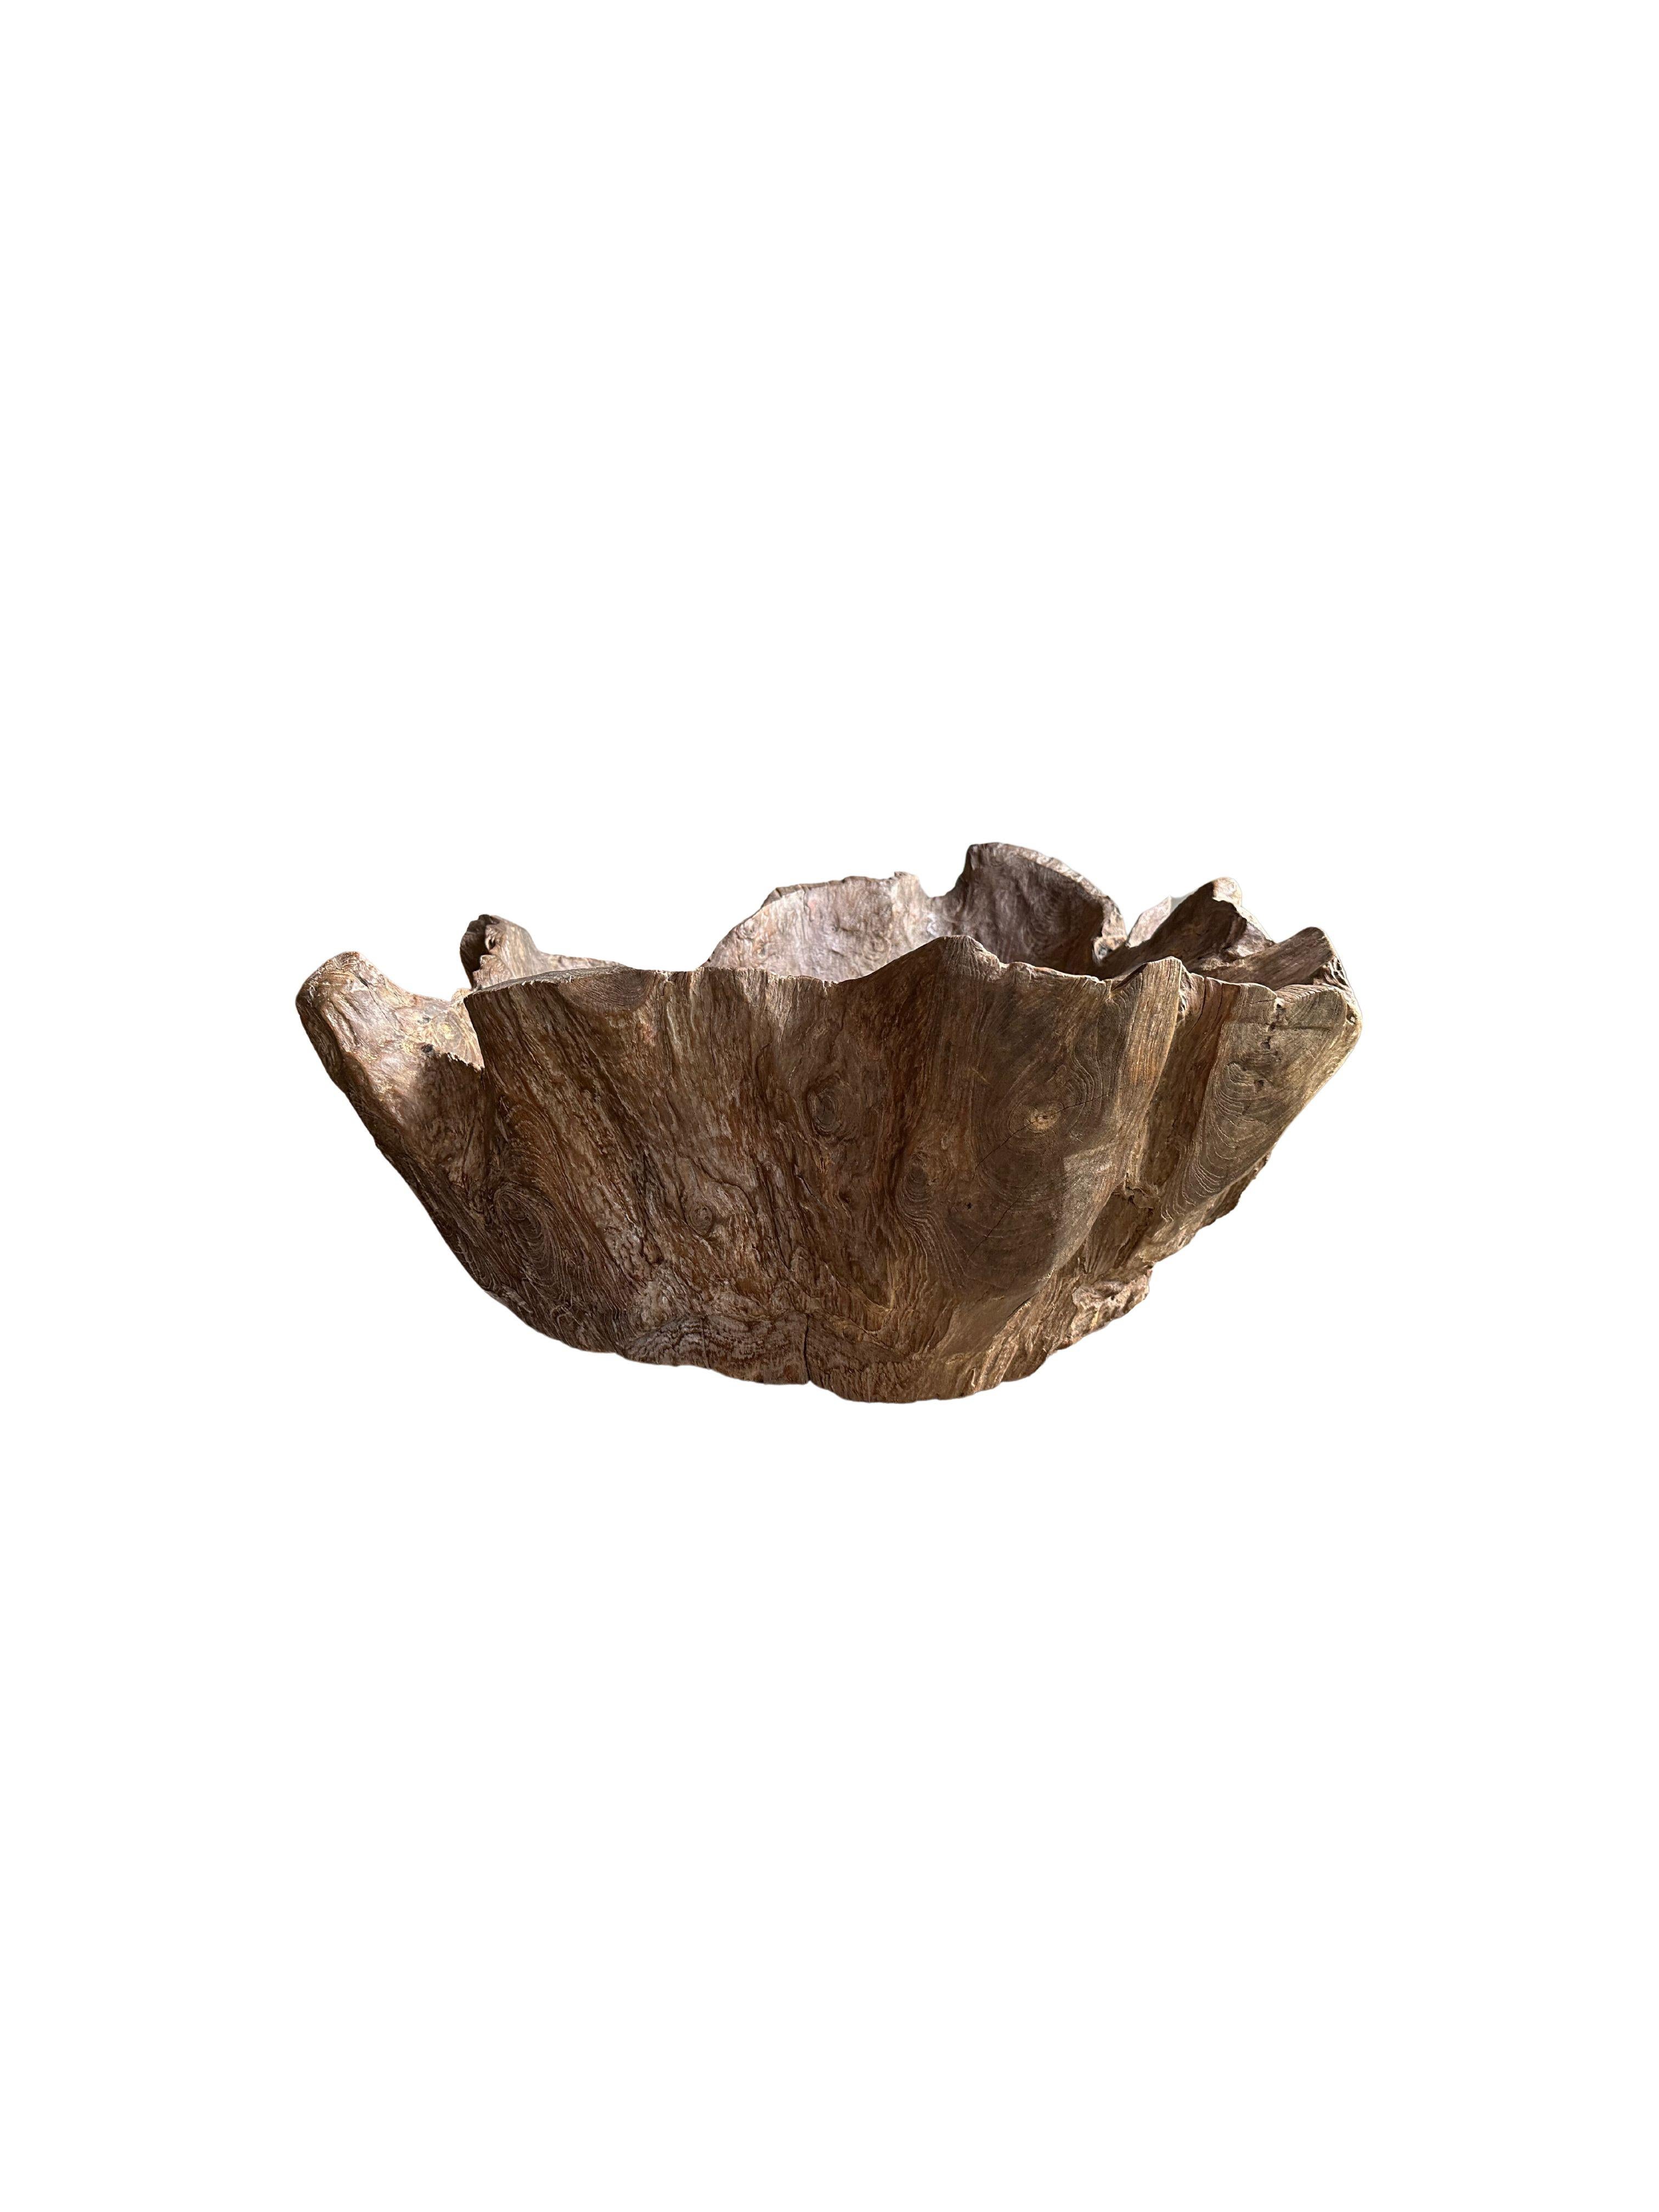 Indonesian Solid Sculptural Teak Wood Bowl with abstract form, Modern Organic For Sale